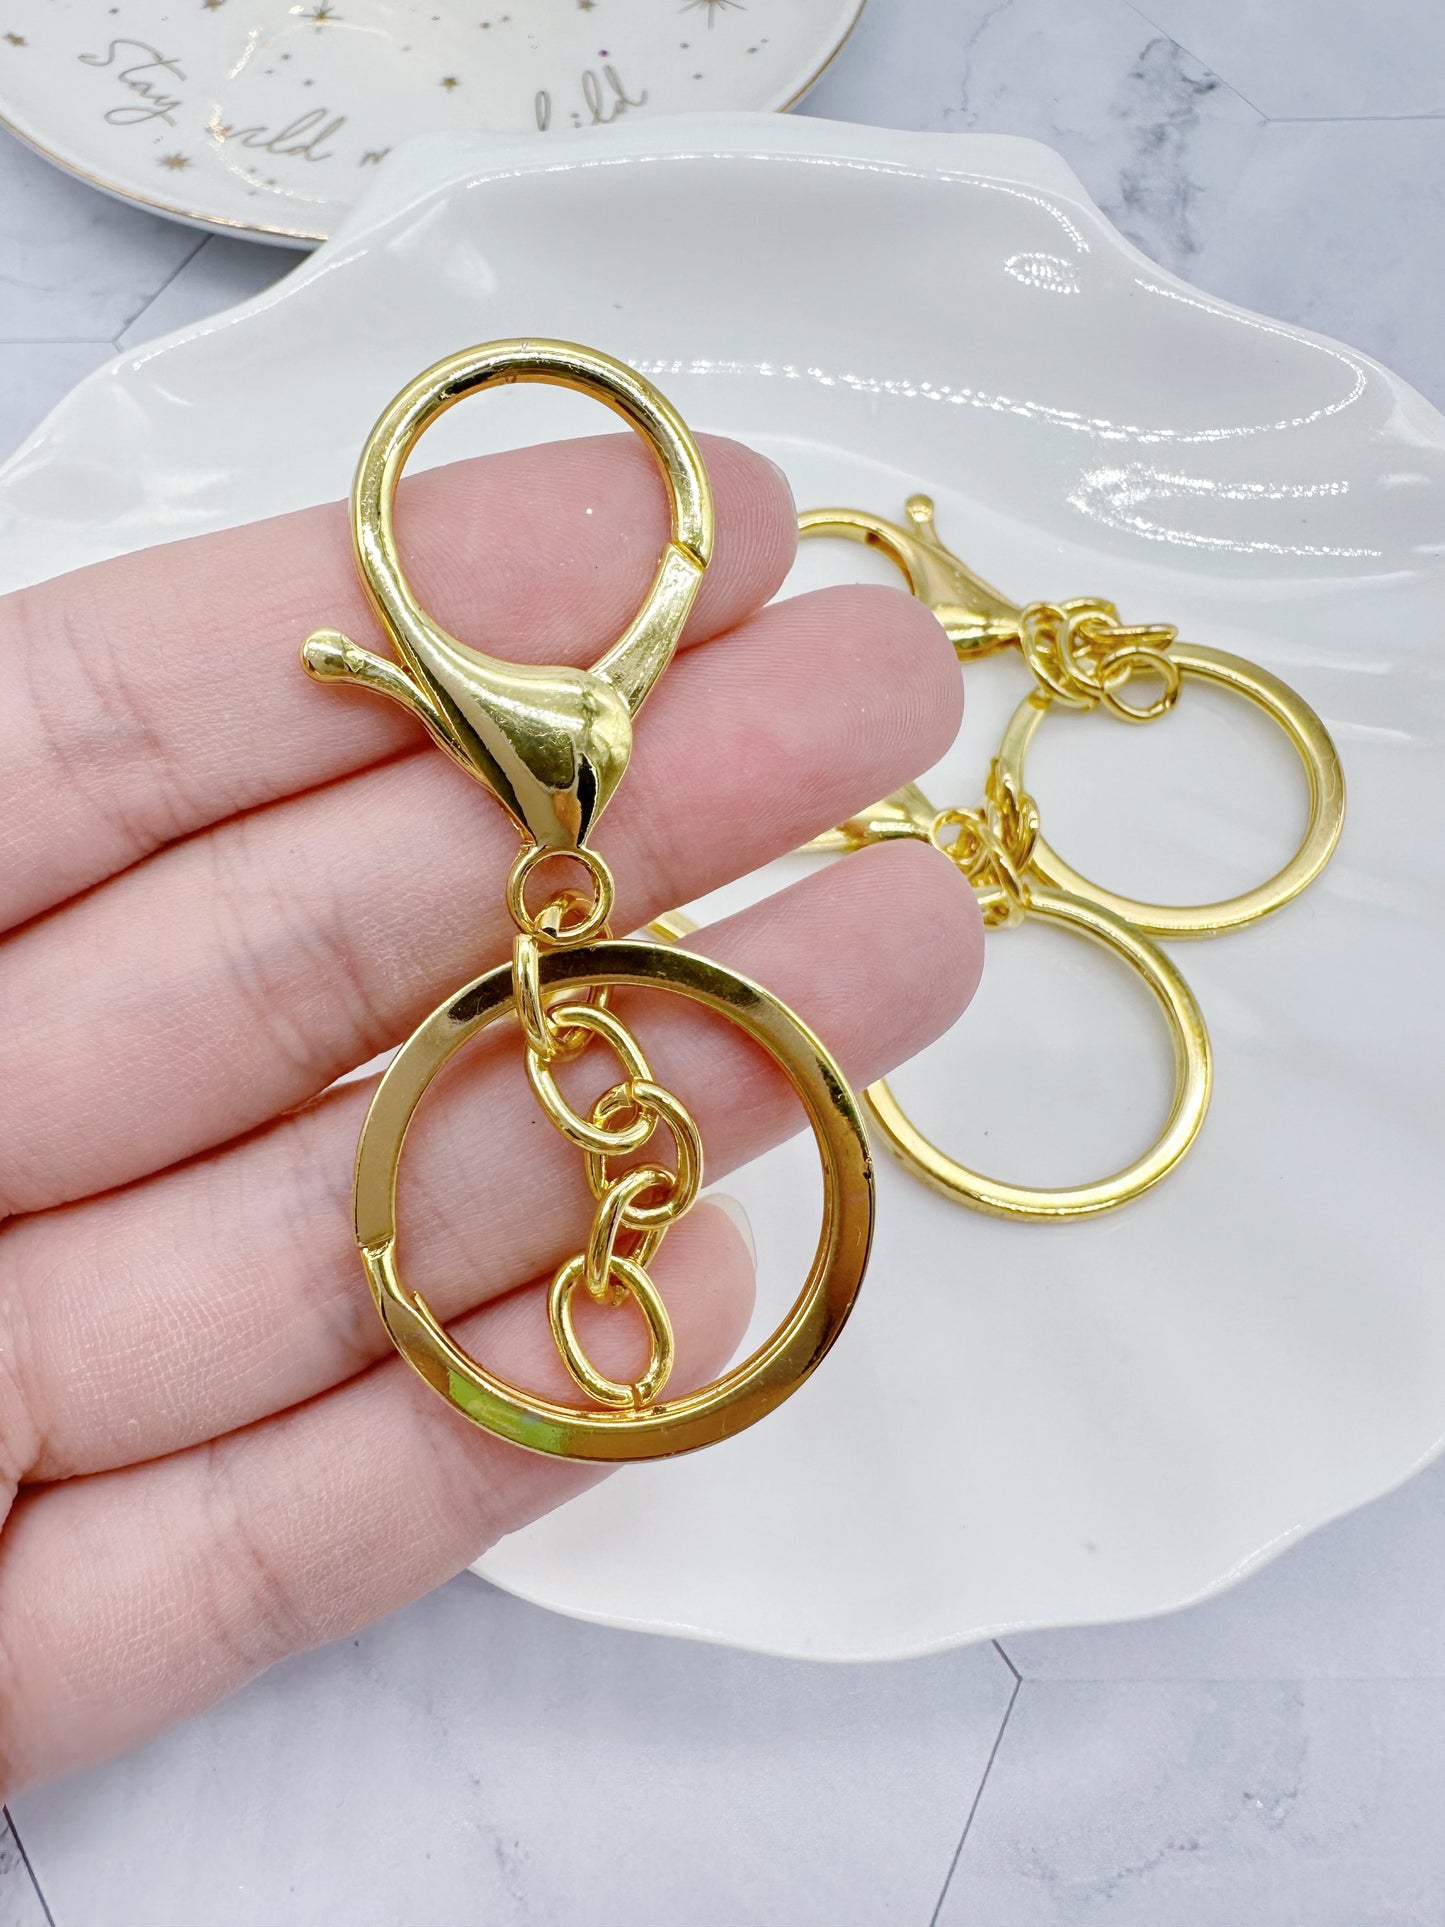 Gold Keychain Rings Lobster Clasp